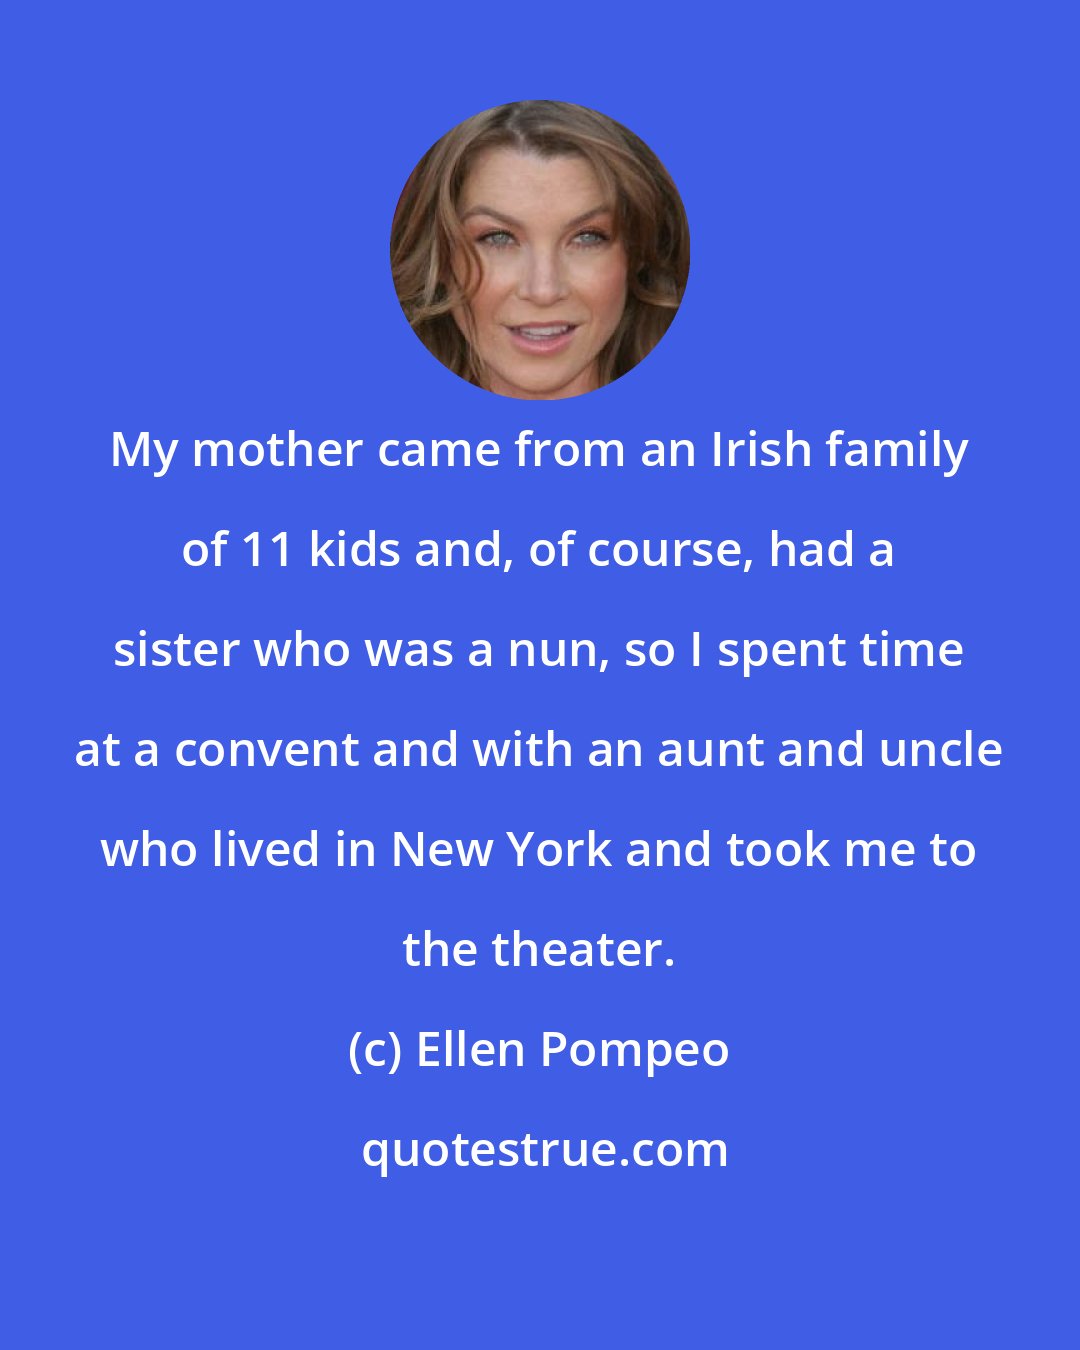 Ellen Pompeo: My mother came from an Irish family of 11 kids and, of course, had a sister who was a nun, so I spent time at a convent and with an aunt and uncle who lived in New York and took me to the theater.